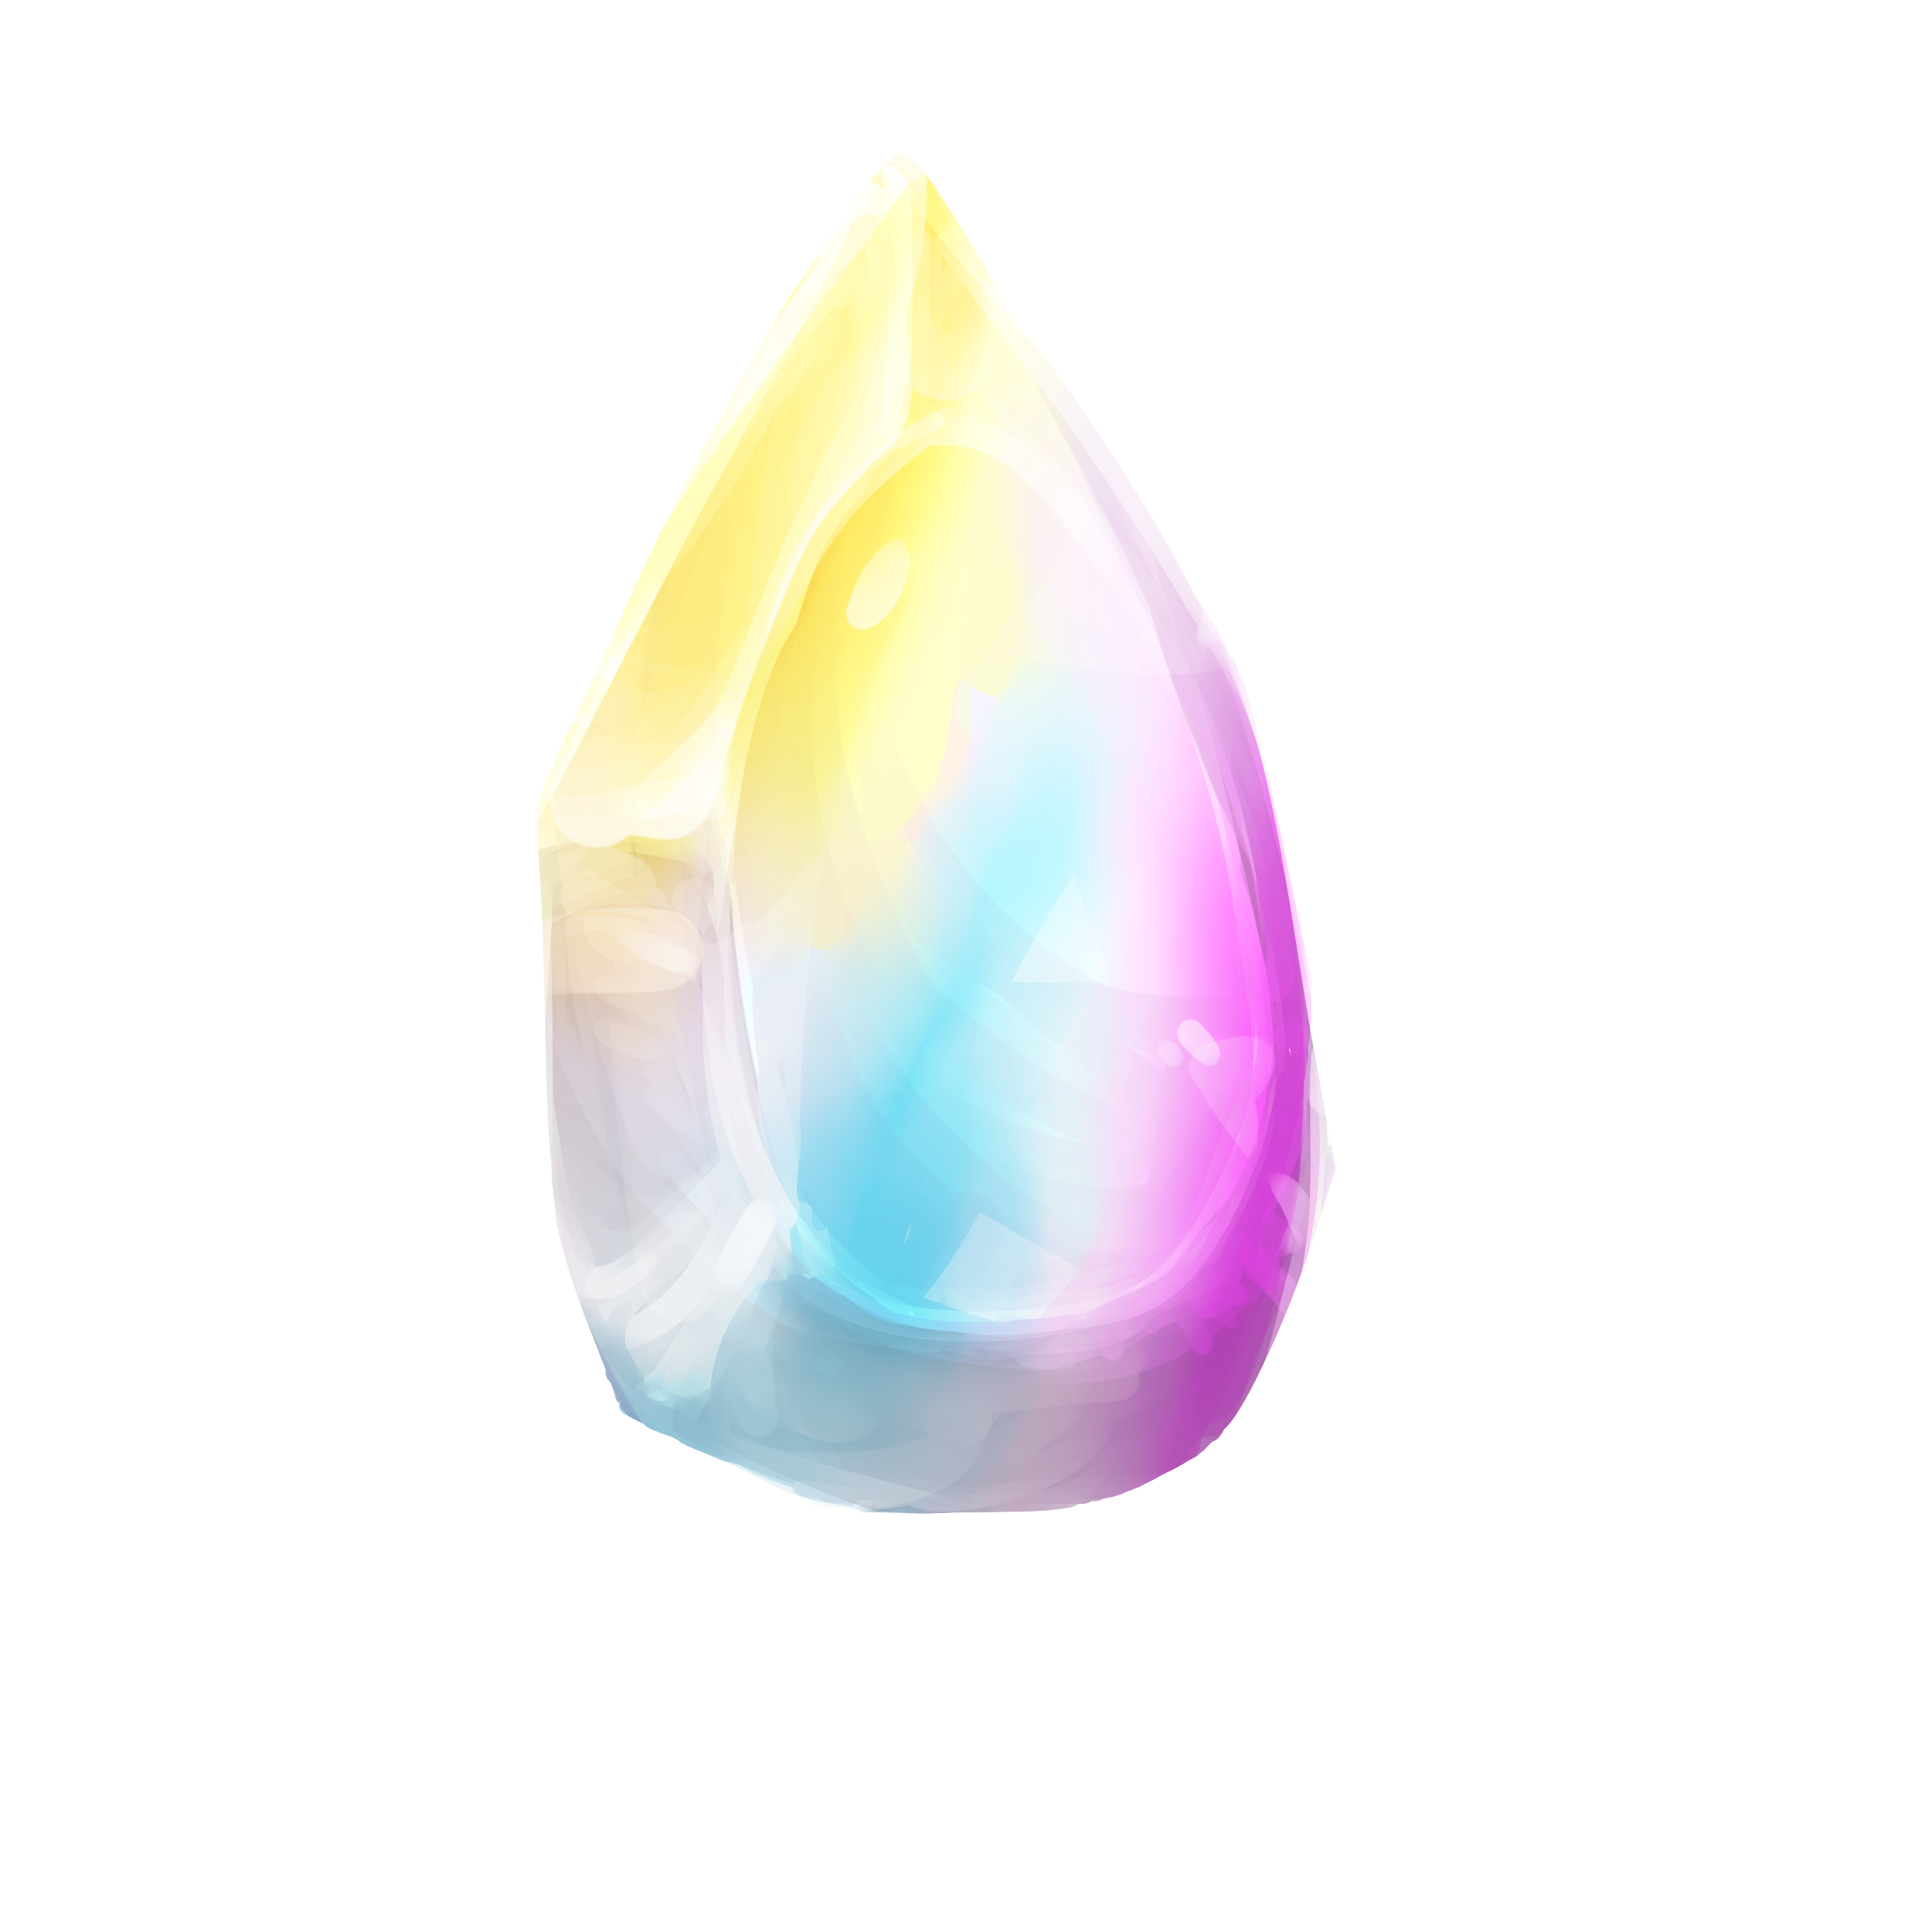 <a href="http://chasmho.me/world/items?name=Gemcrafted Shard - Prismpitch" class="display-item">Gemcrafted Shard - Prismpitch</a>